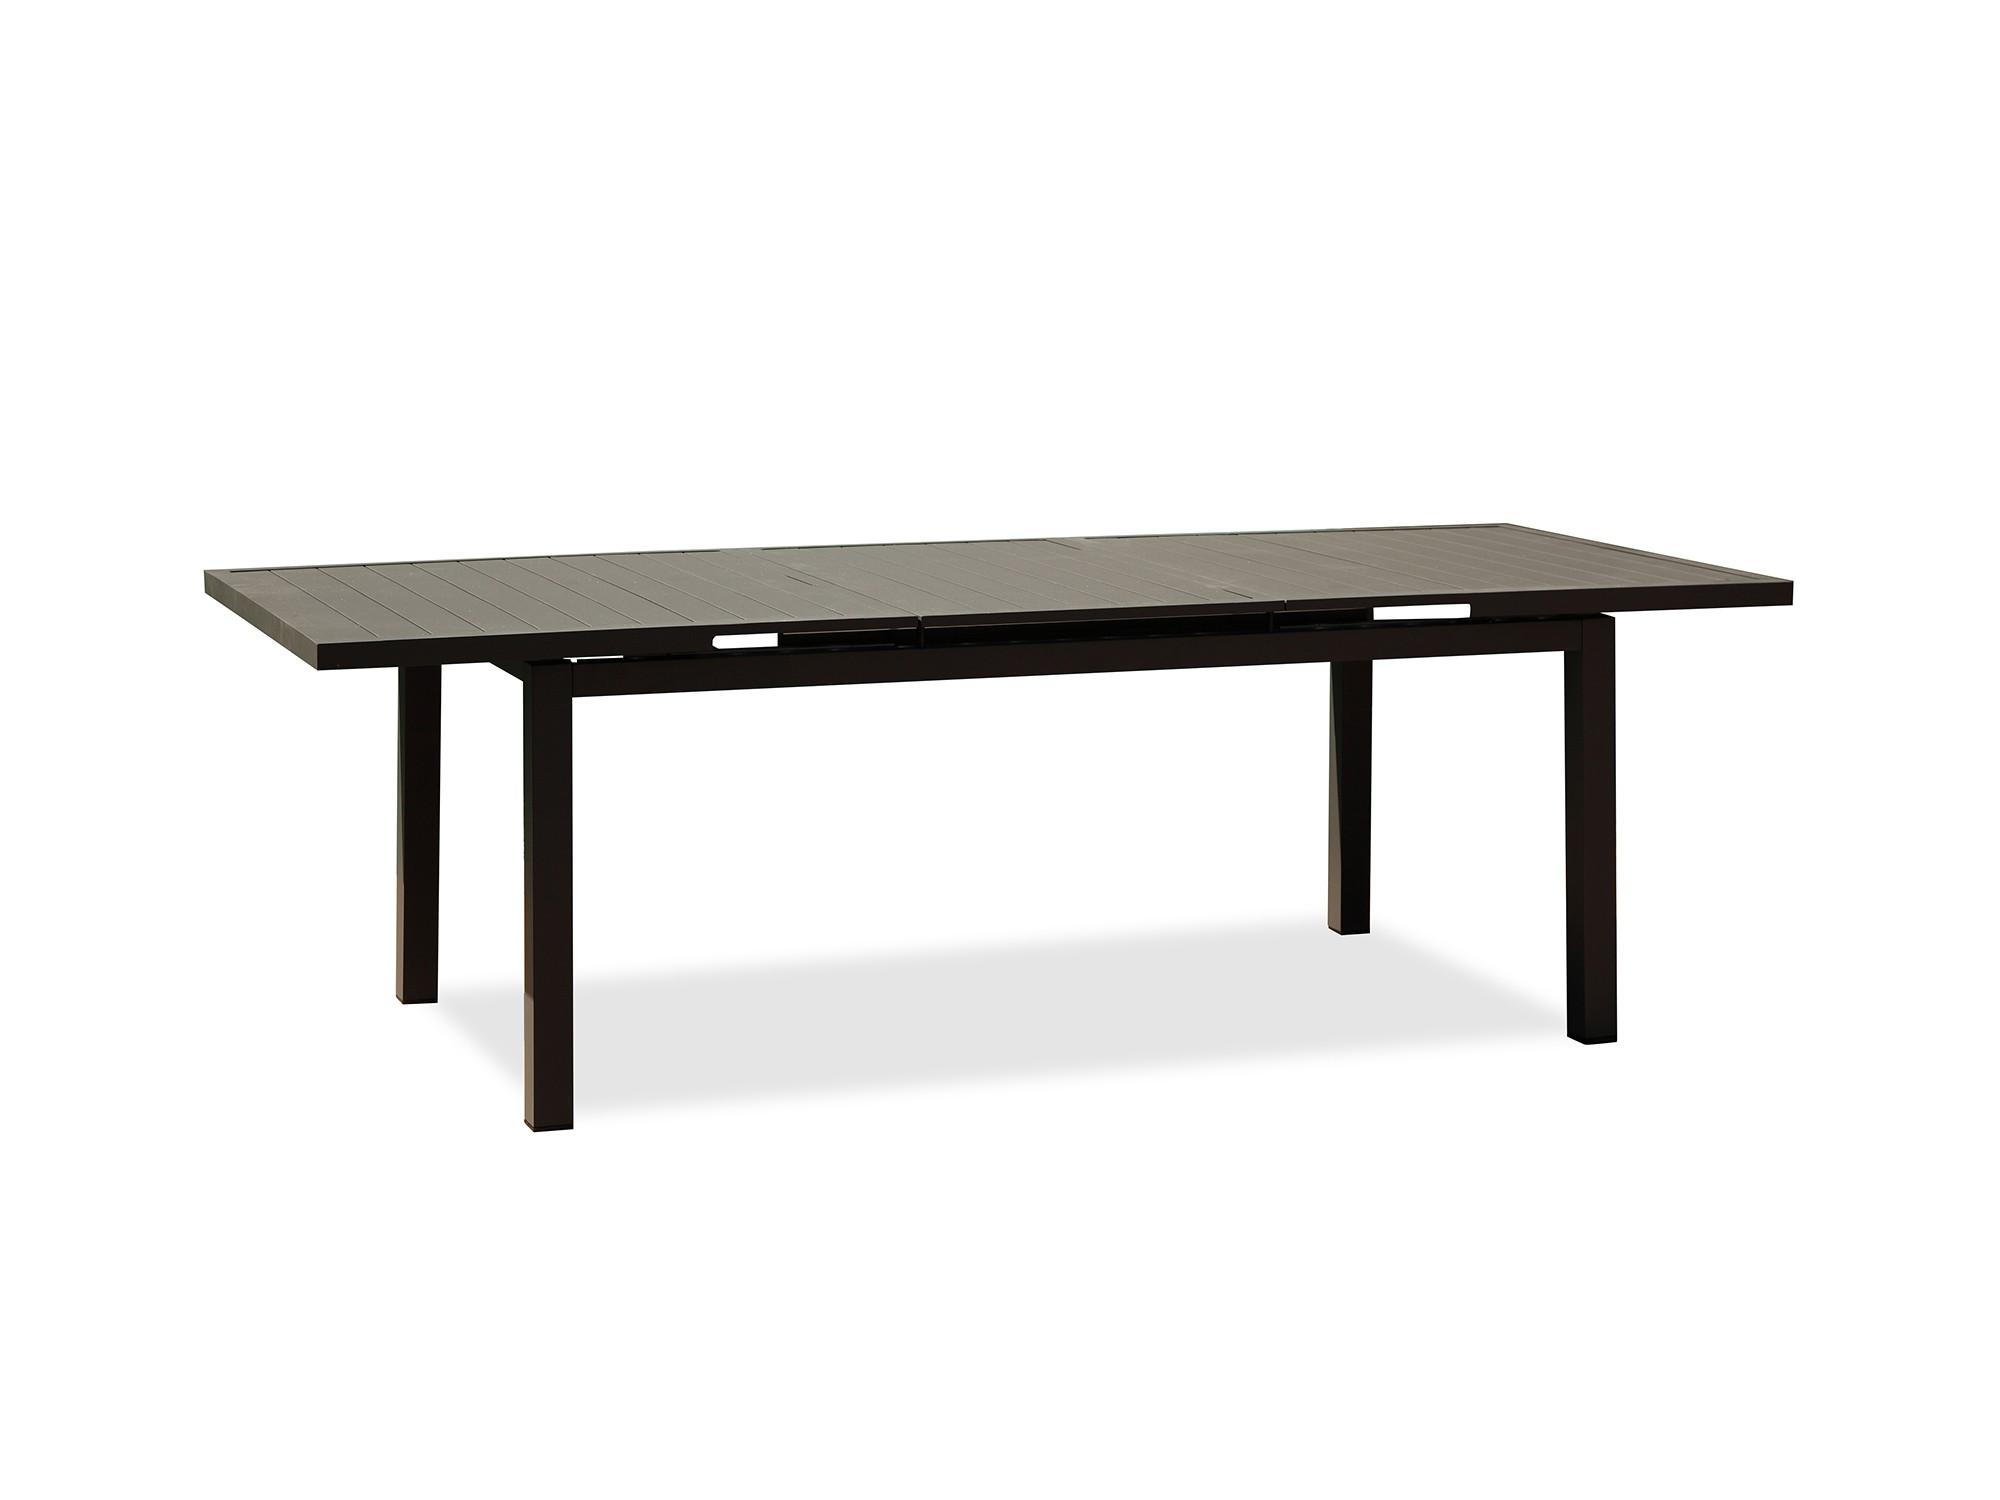 Modern Outdoor Dining Table DT1567-GRY Alum DT1567-GRY in Gray 